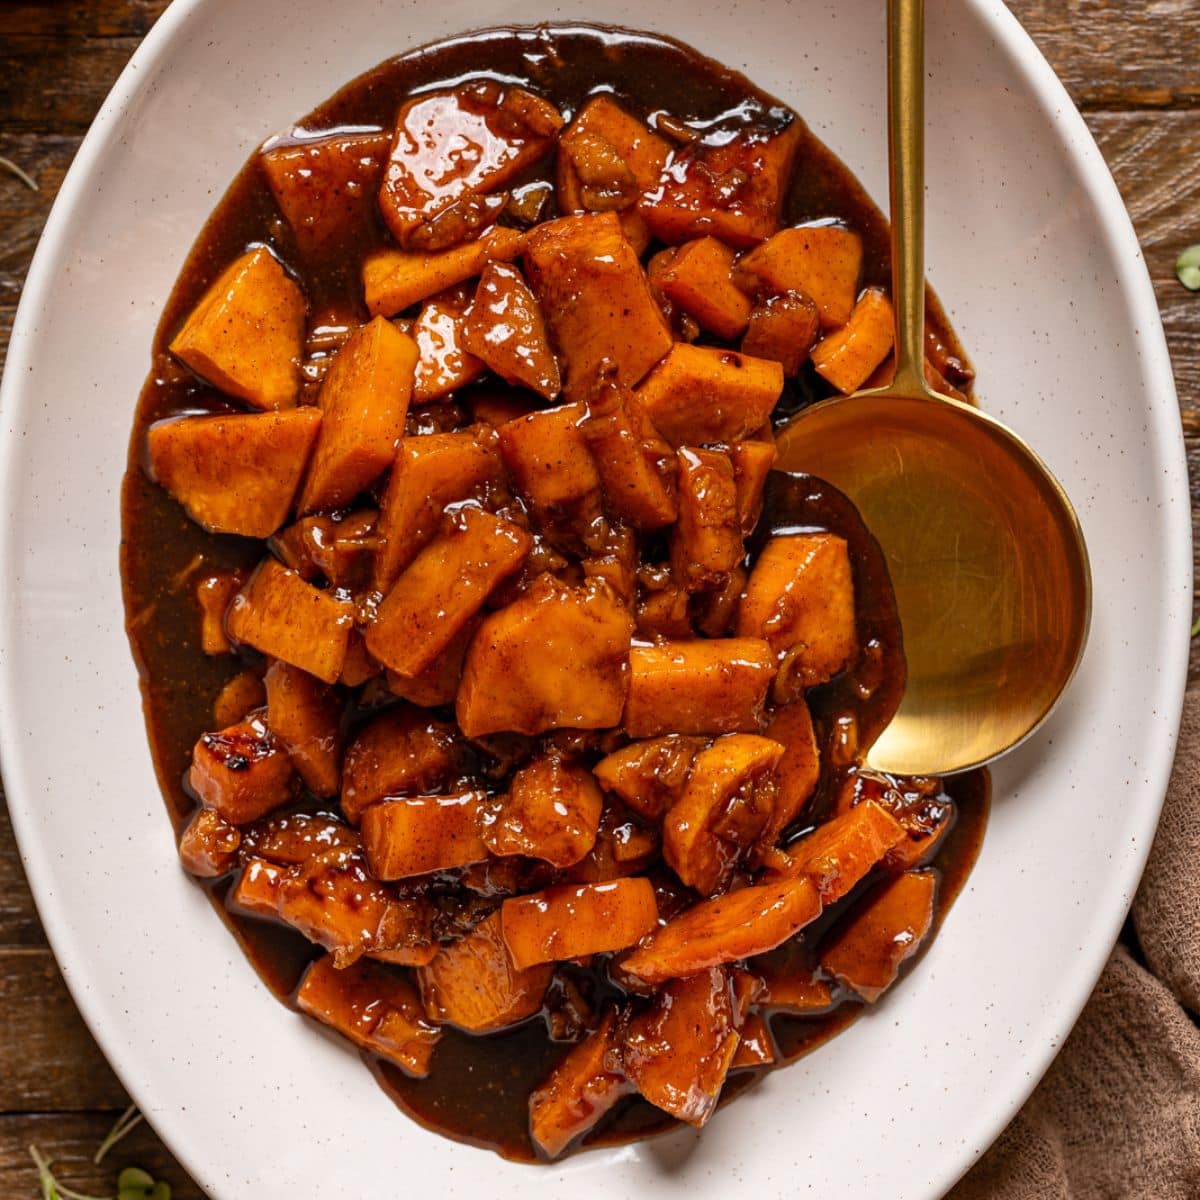 Cooked yams in a white platter with a spoon on a brown wood table.